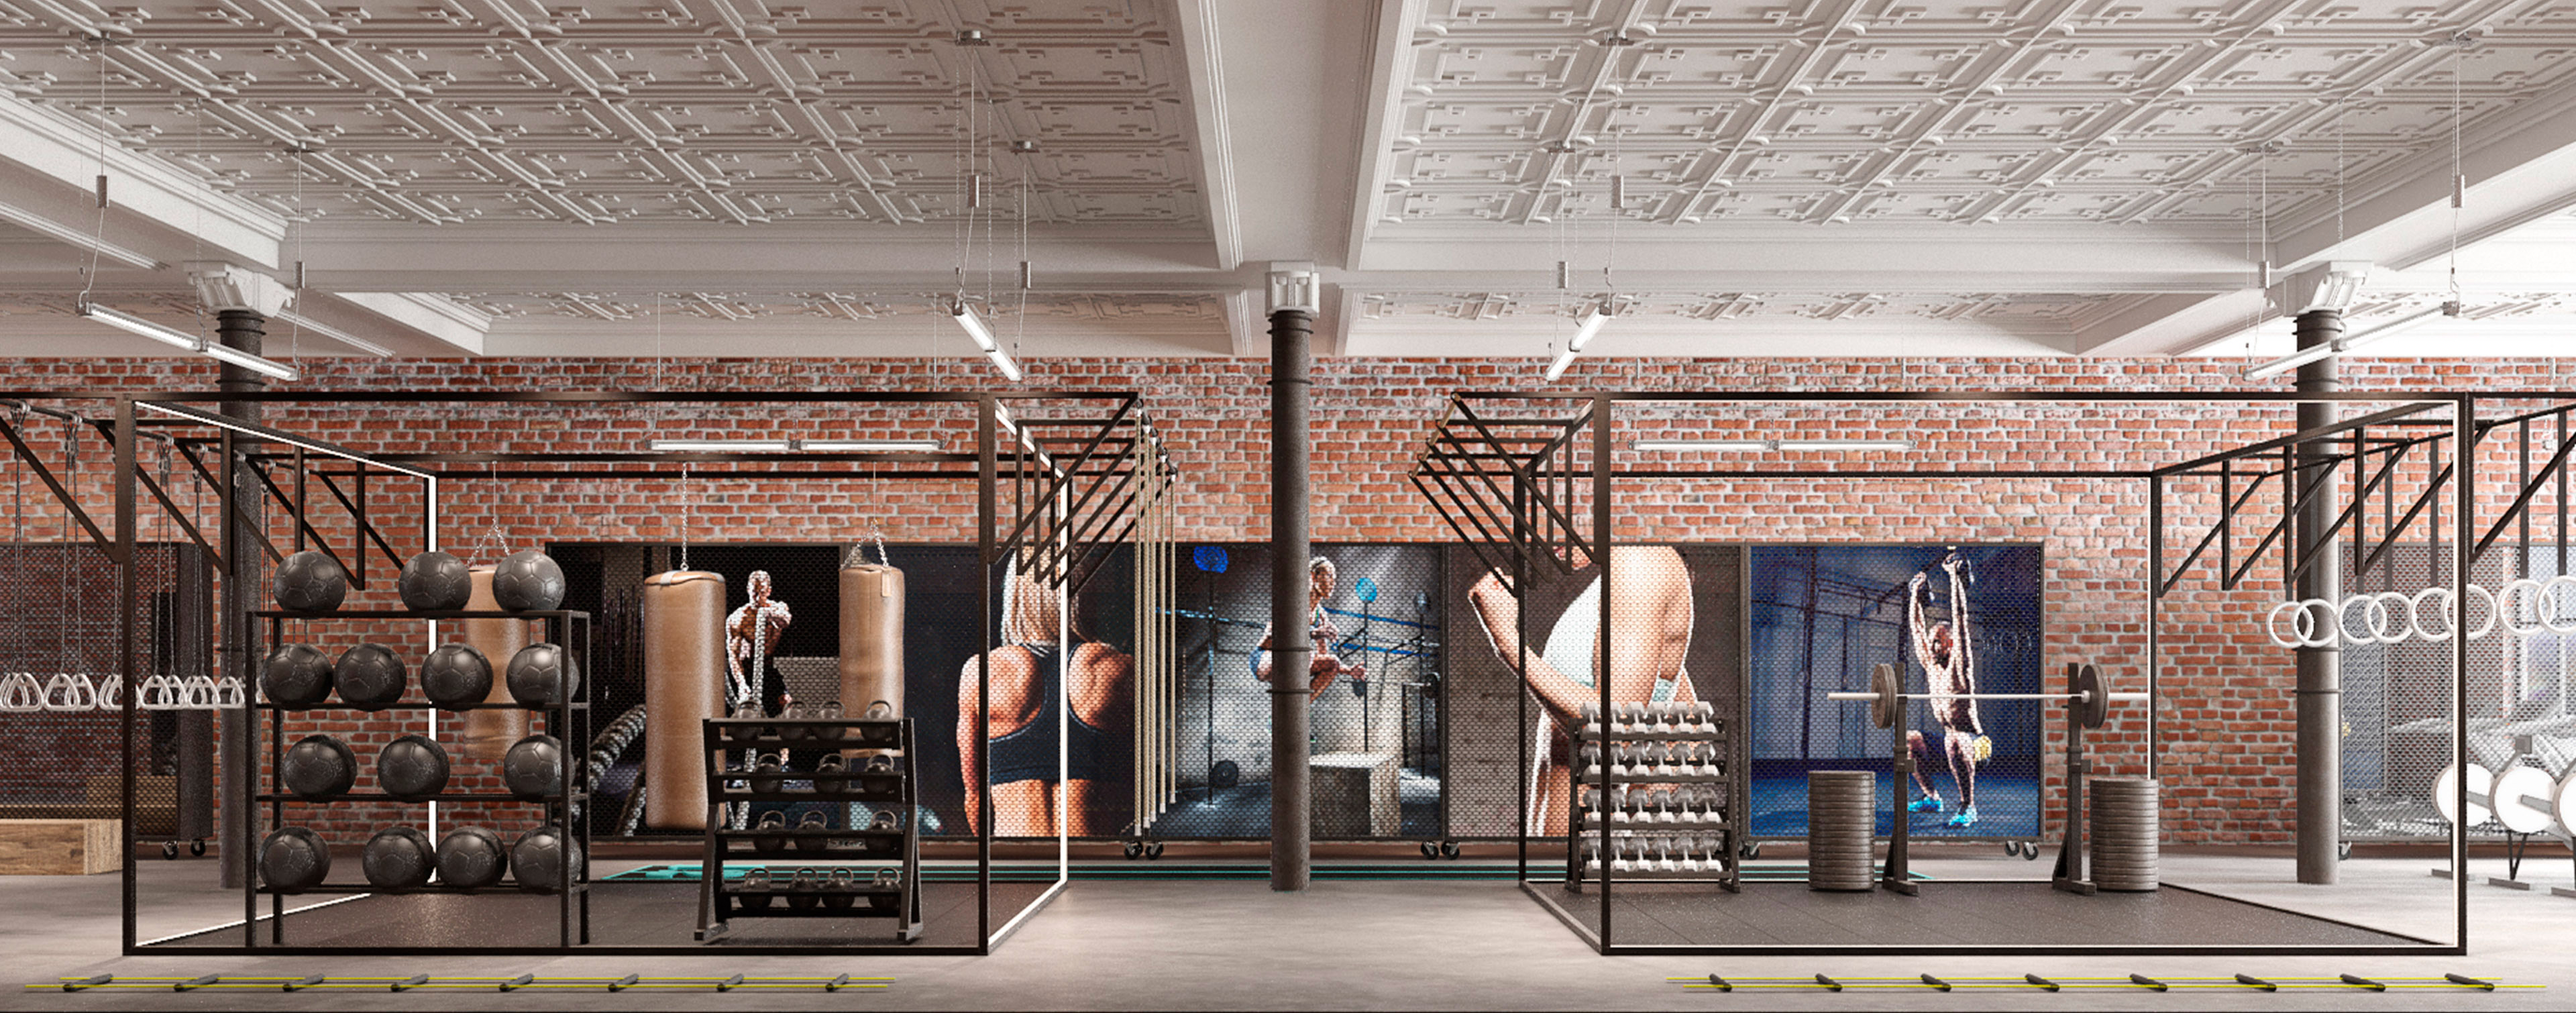 luv studio luxury architects new york fit house gym IMG 01 - LUV Studio - Architecture et design - Barcelone